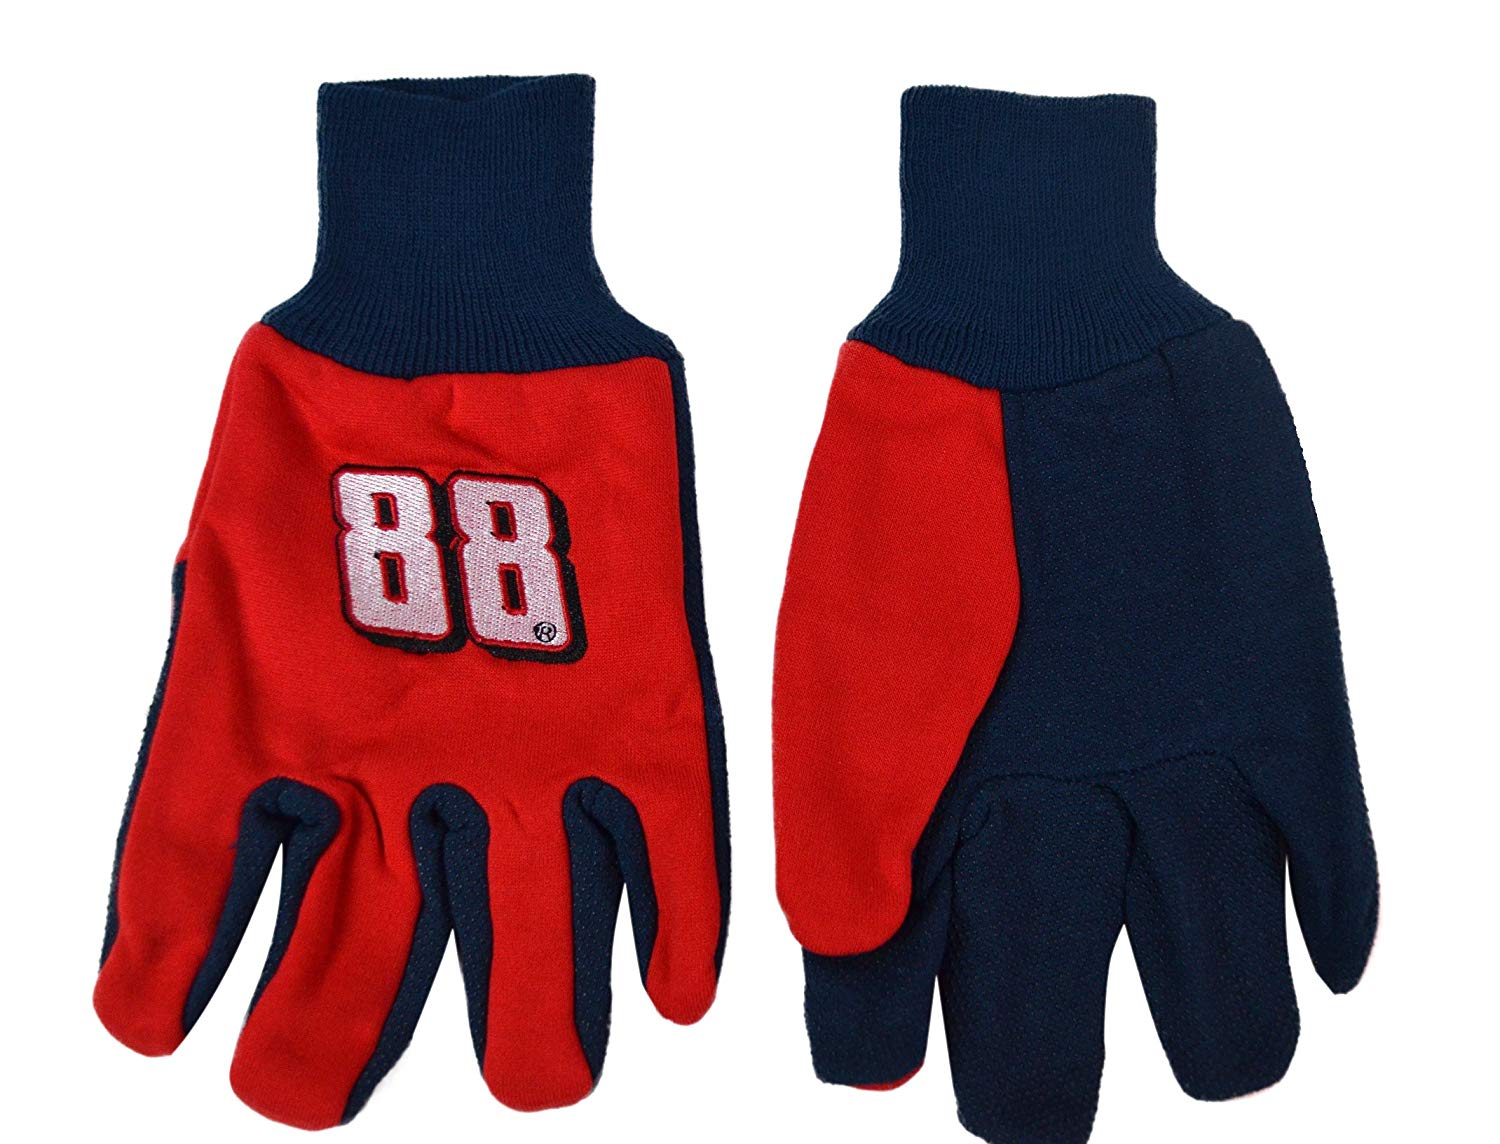 Official NASCAR Fan Shop Authentic 2-Pack Utility Work Glove Set. Show Pride for your favorite NASCAR driver while working on your vehicle at home or work